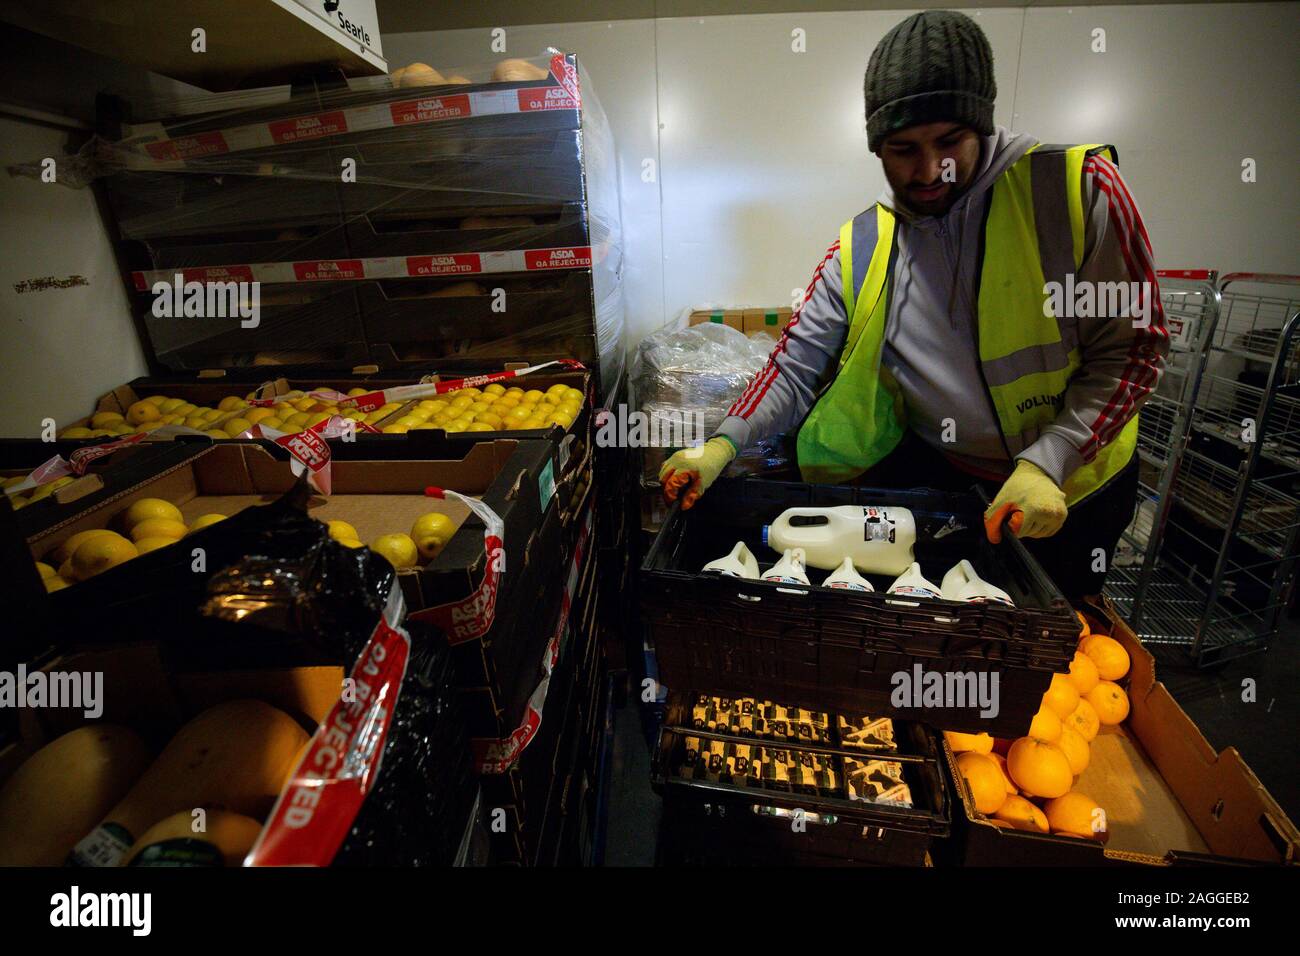 A volunteer in the FareShare warehouse in Birmingham. Britain's biggest food redistribution charity are experiencing their busiest period this Christmas with 25 warehouses serving 11,000 charities and community groups across the country. Stock Photo